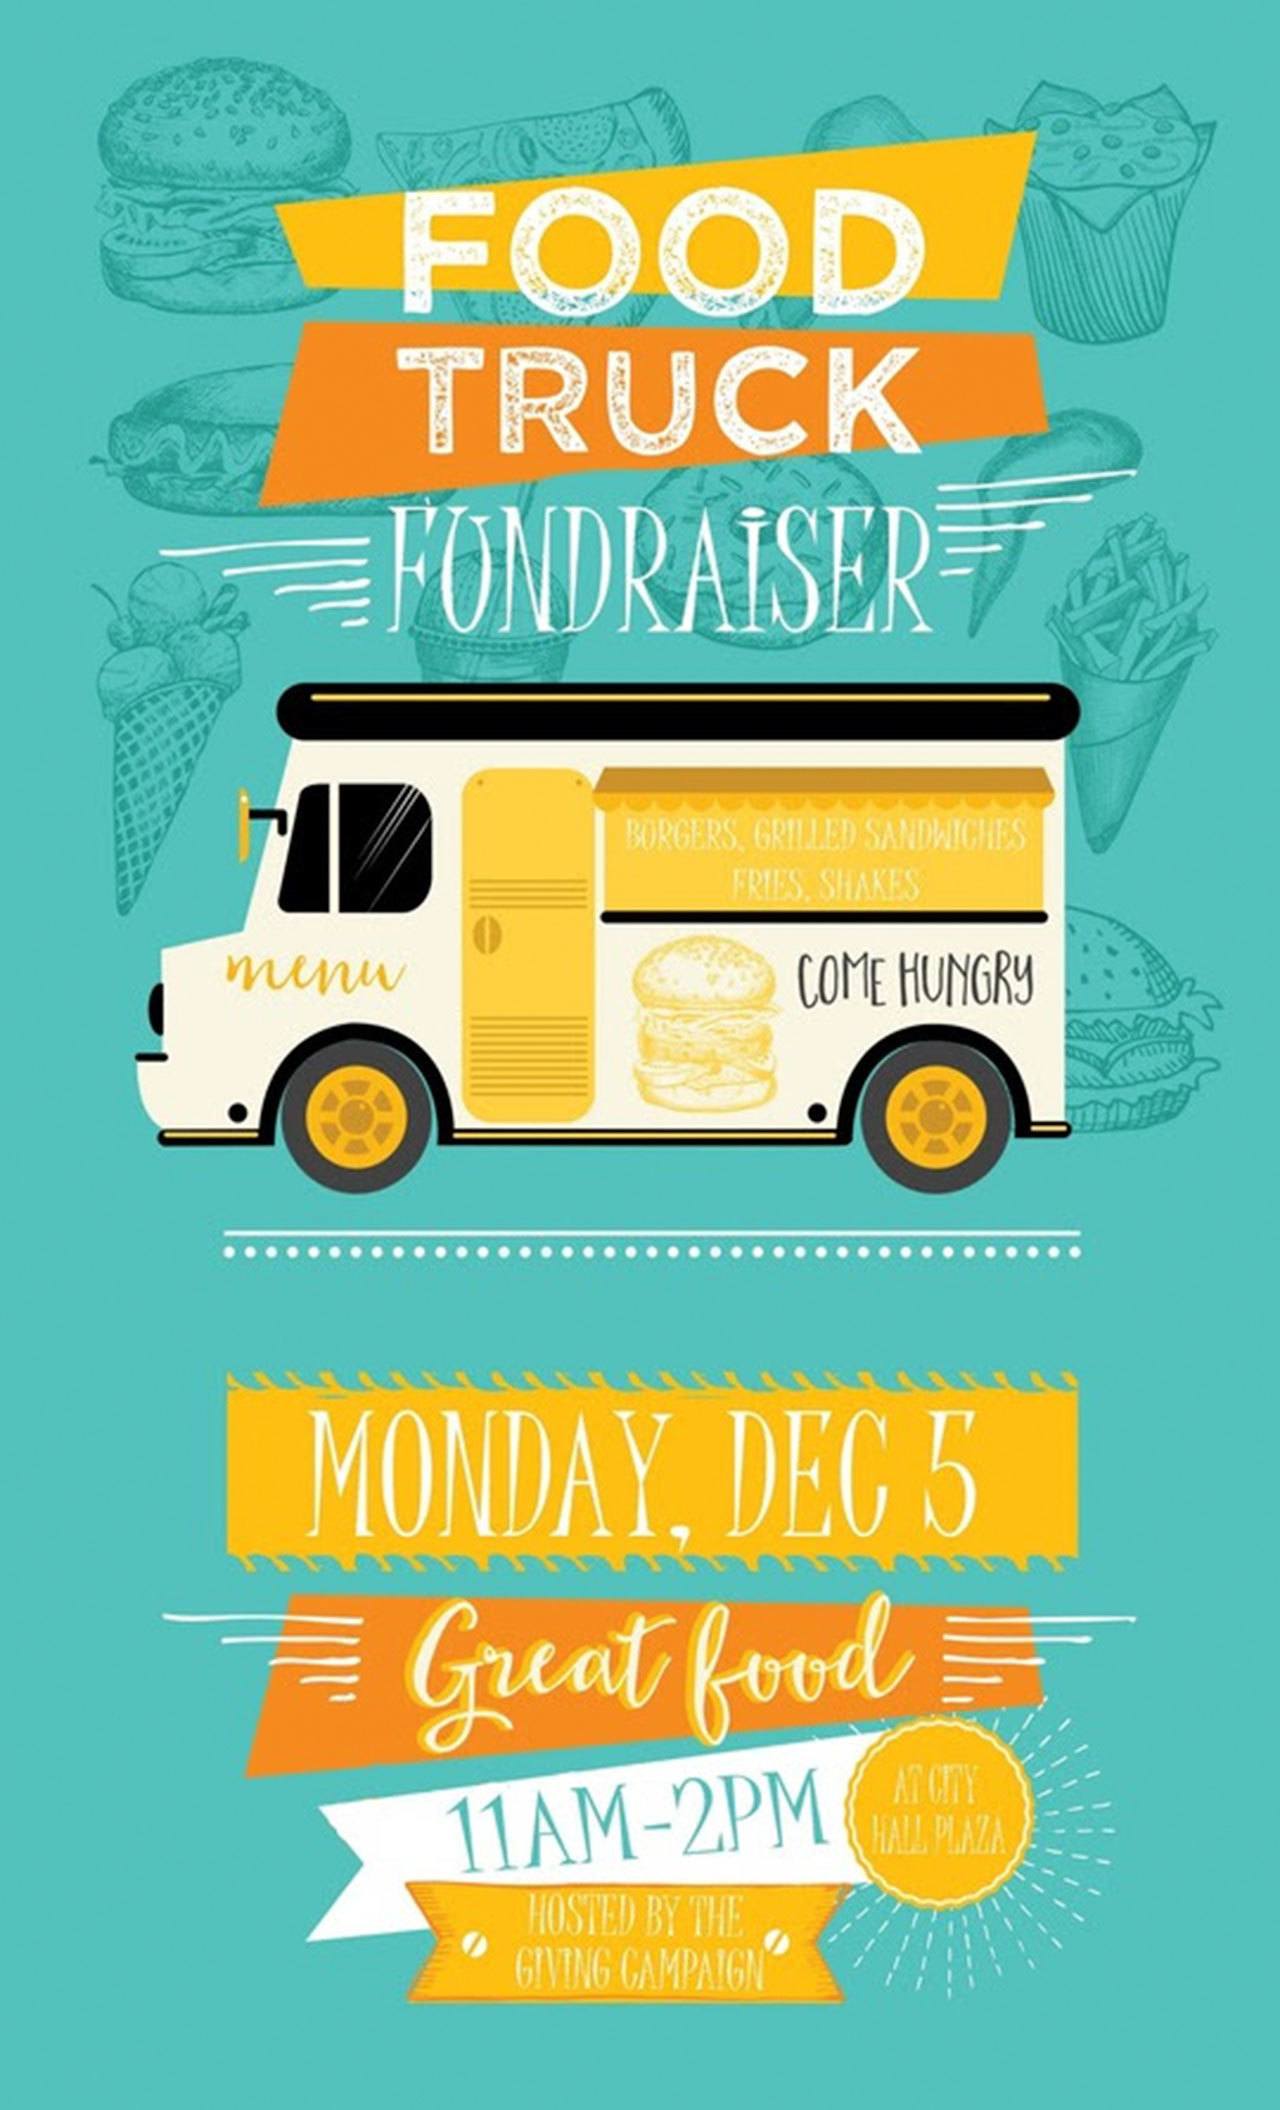 City of Auburn hosts food truck fundraiser to benefit local charities